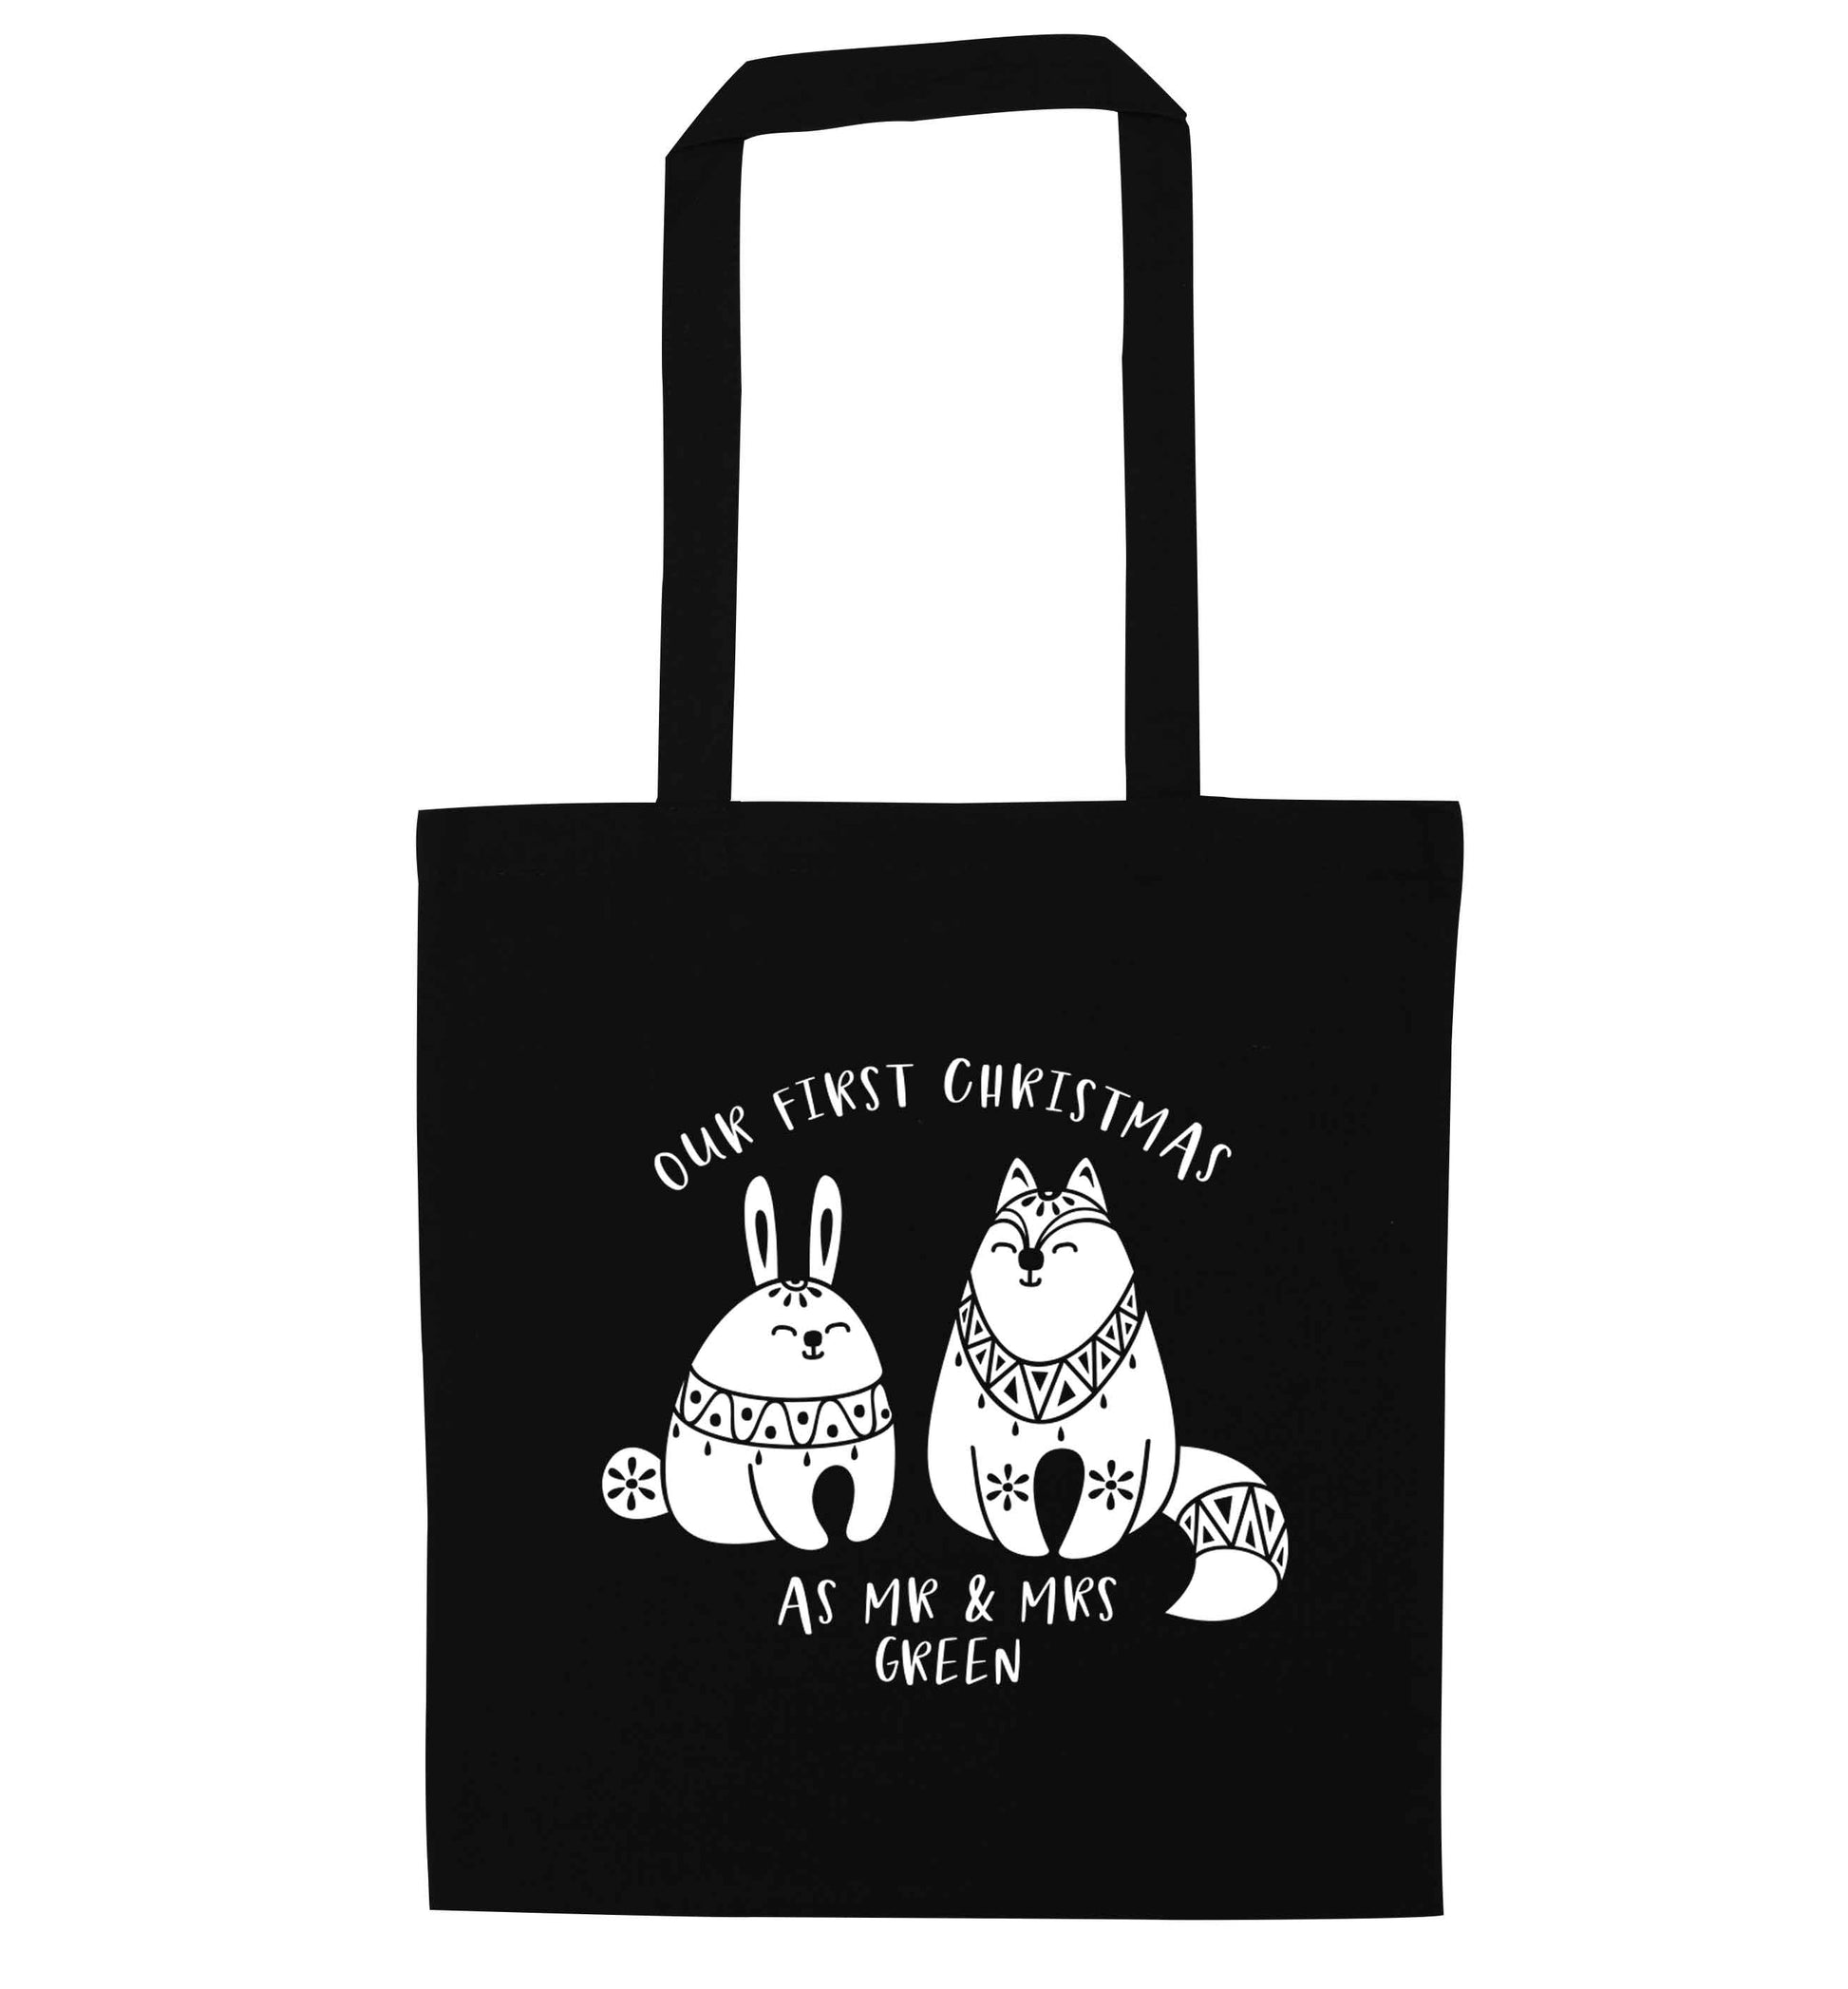 Our first Christmas as Mr & Mrs personalised black tote bag